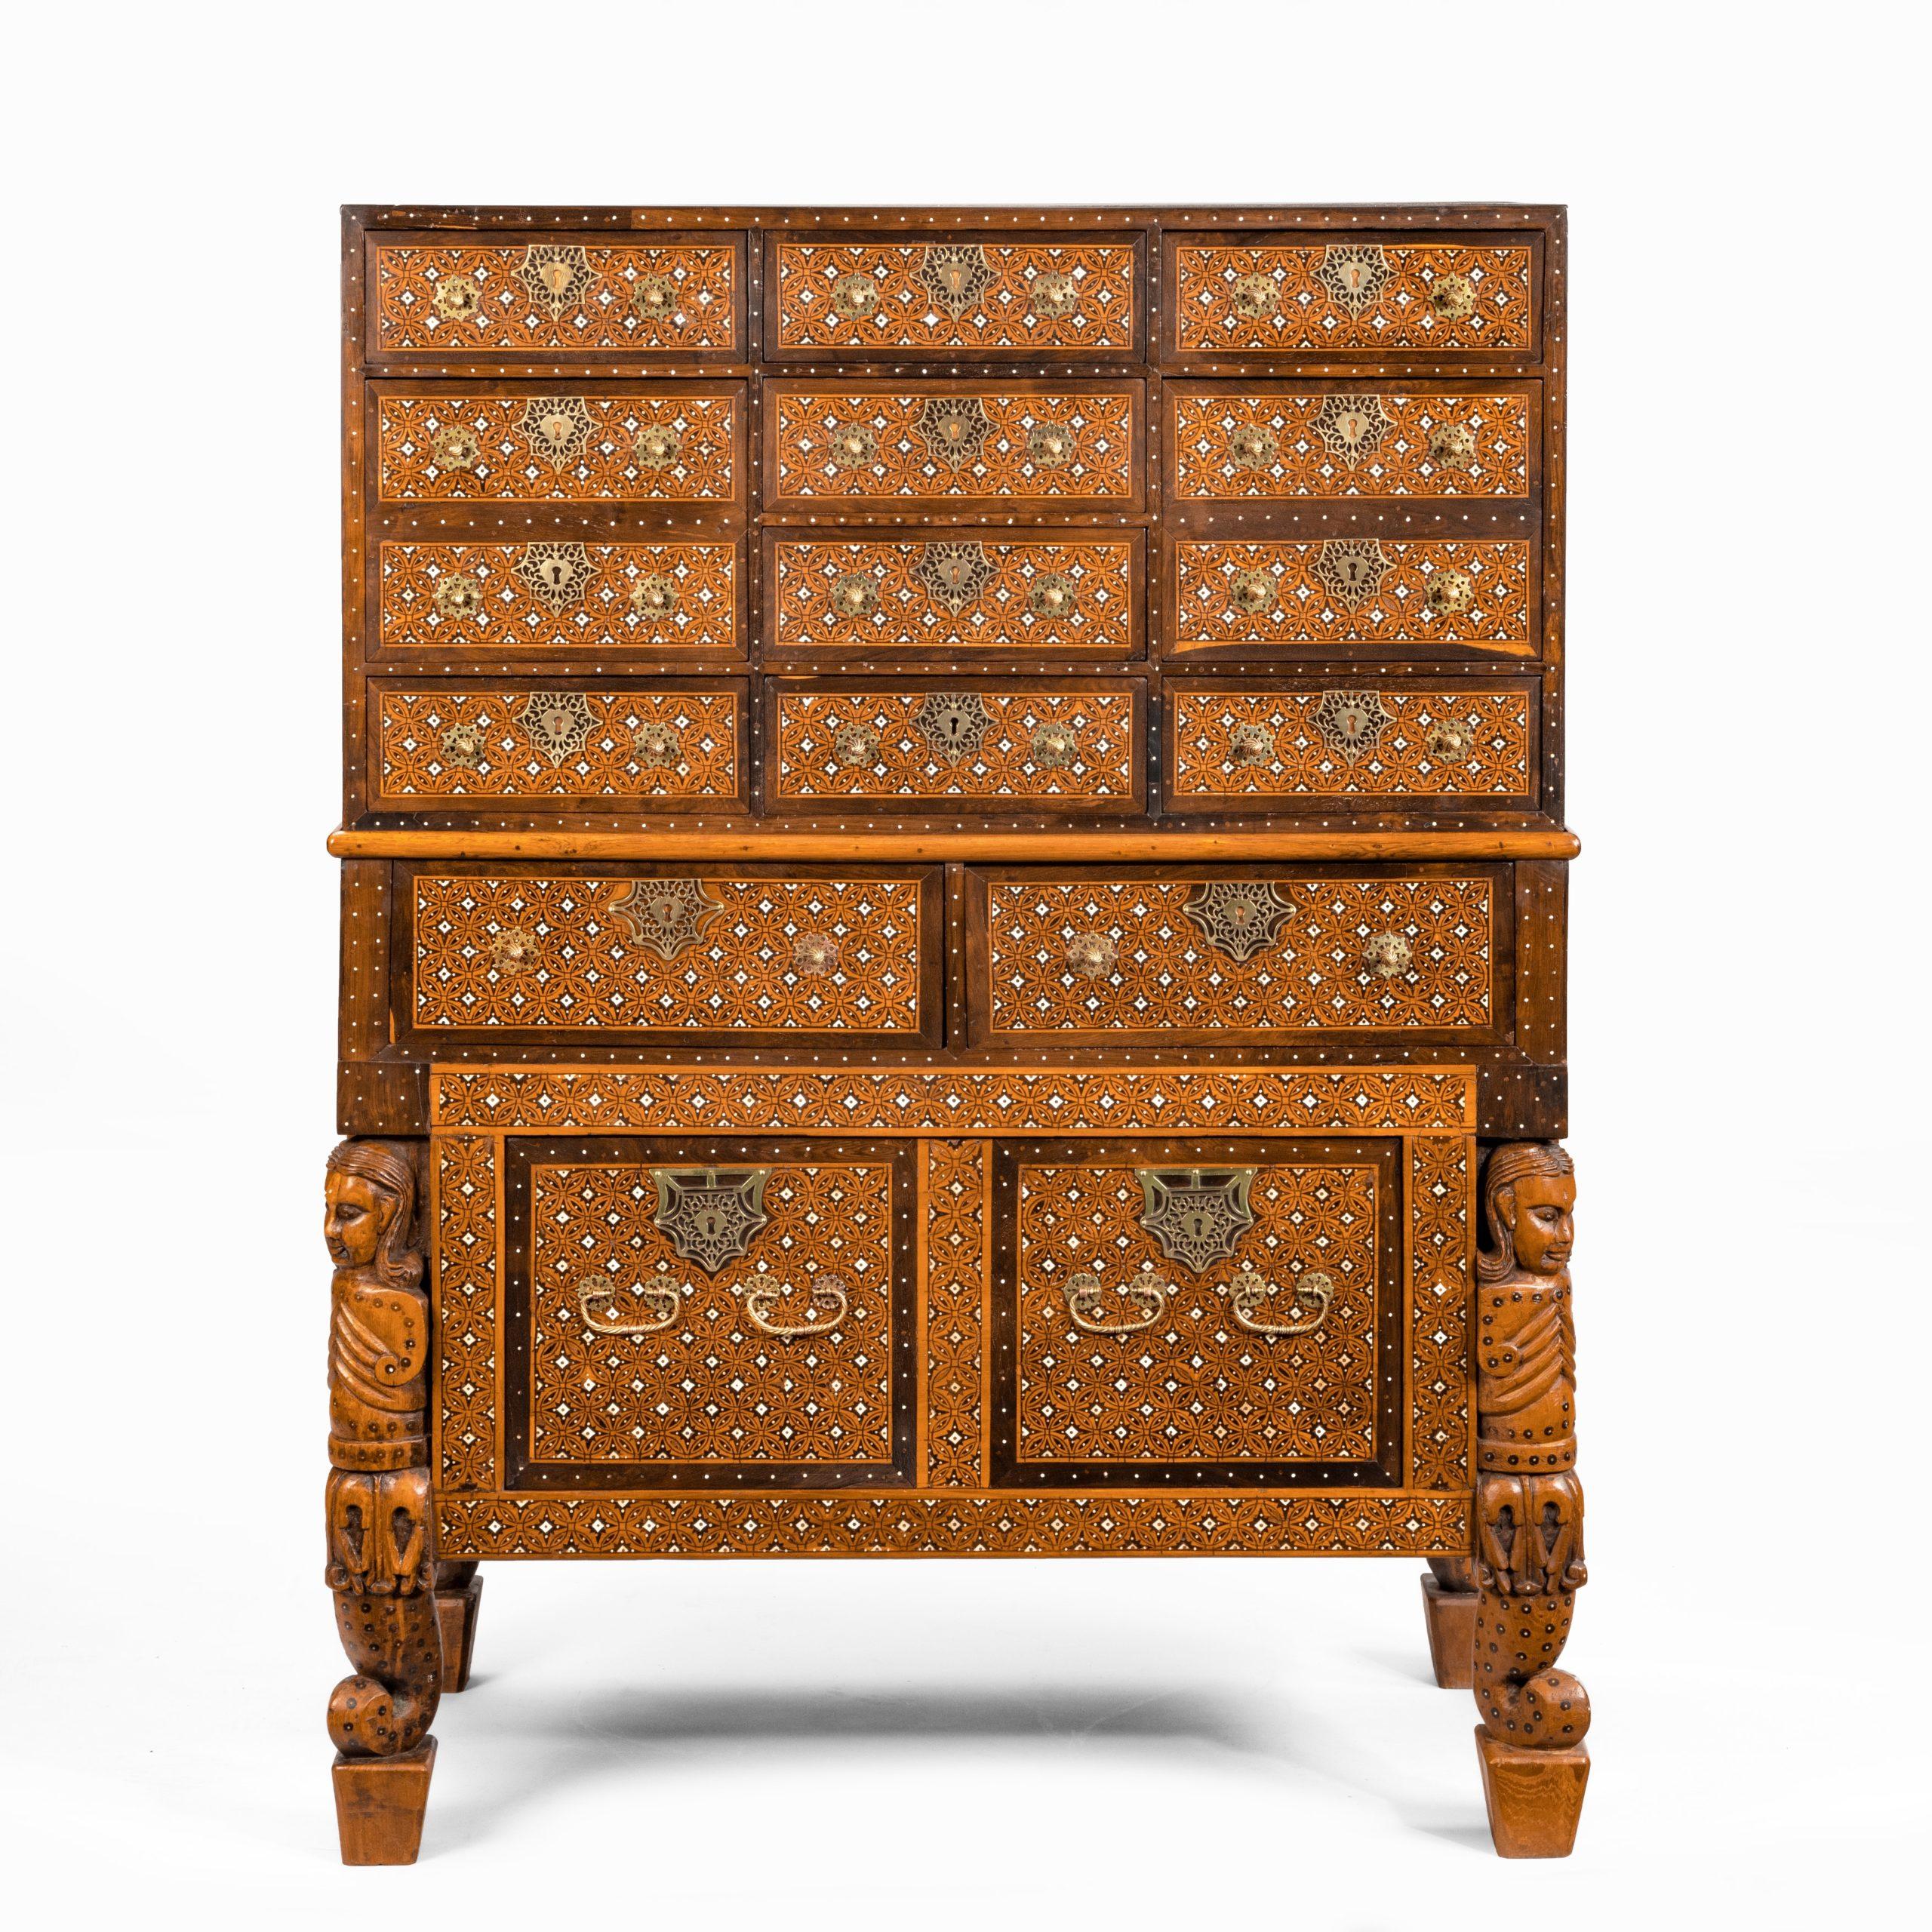 This chest on chest is of rectangular form in two sections. The upper section has twelve similar drawers in four registers and carrying handles on the sides. The base has a pair of frieze drawers above a single deep drawer, disguised as a pair, with